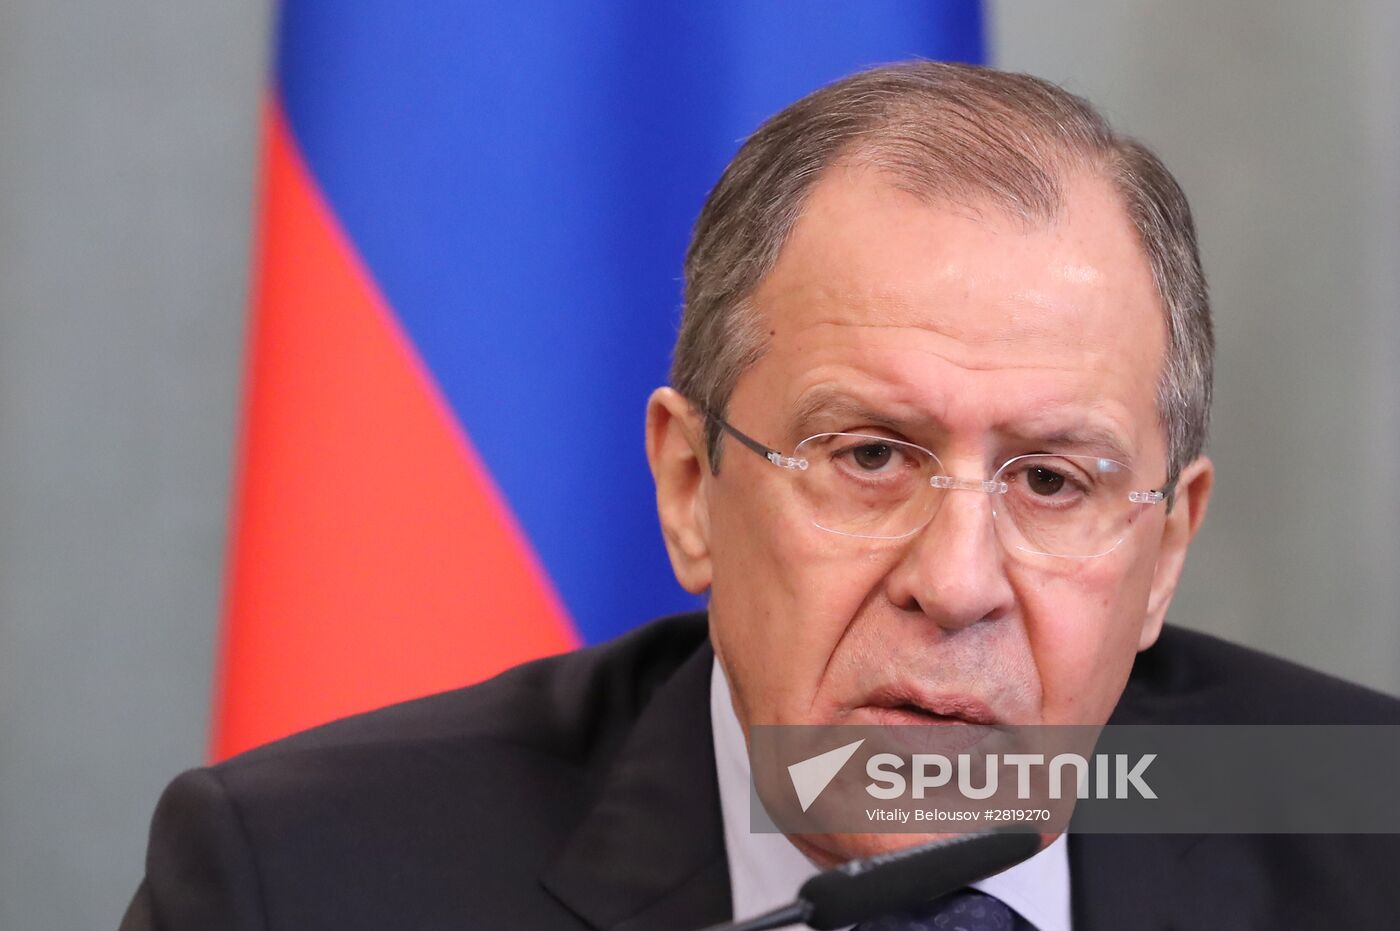 Russian Foreign Minister Sergei Lavrov meets with his Moldovan counterpart Andrei Galbur